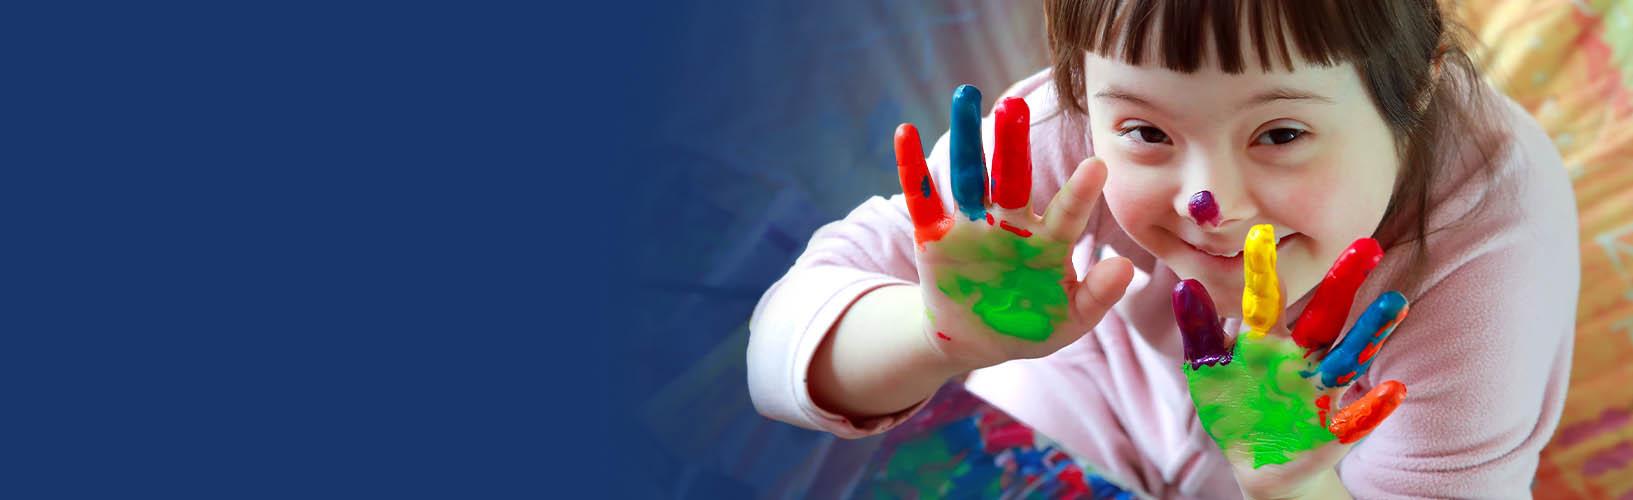 Young adolescent female child with paint on her hands